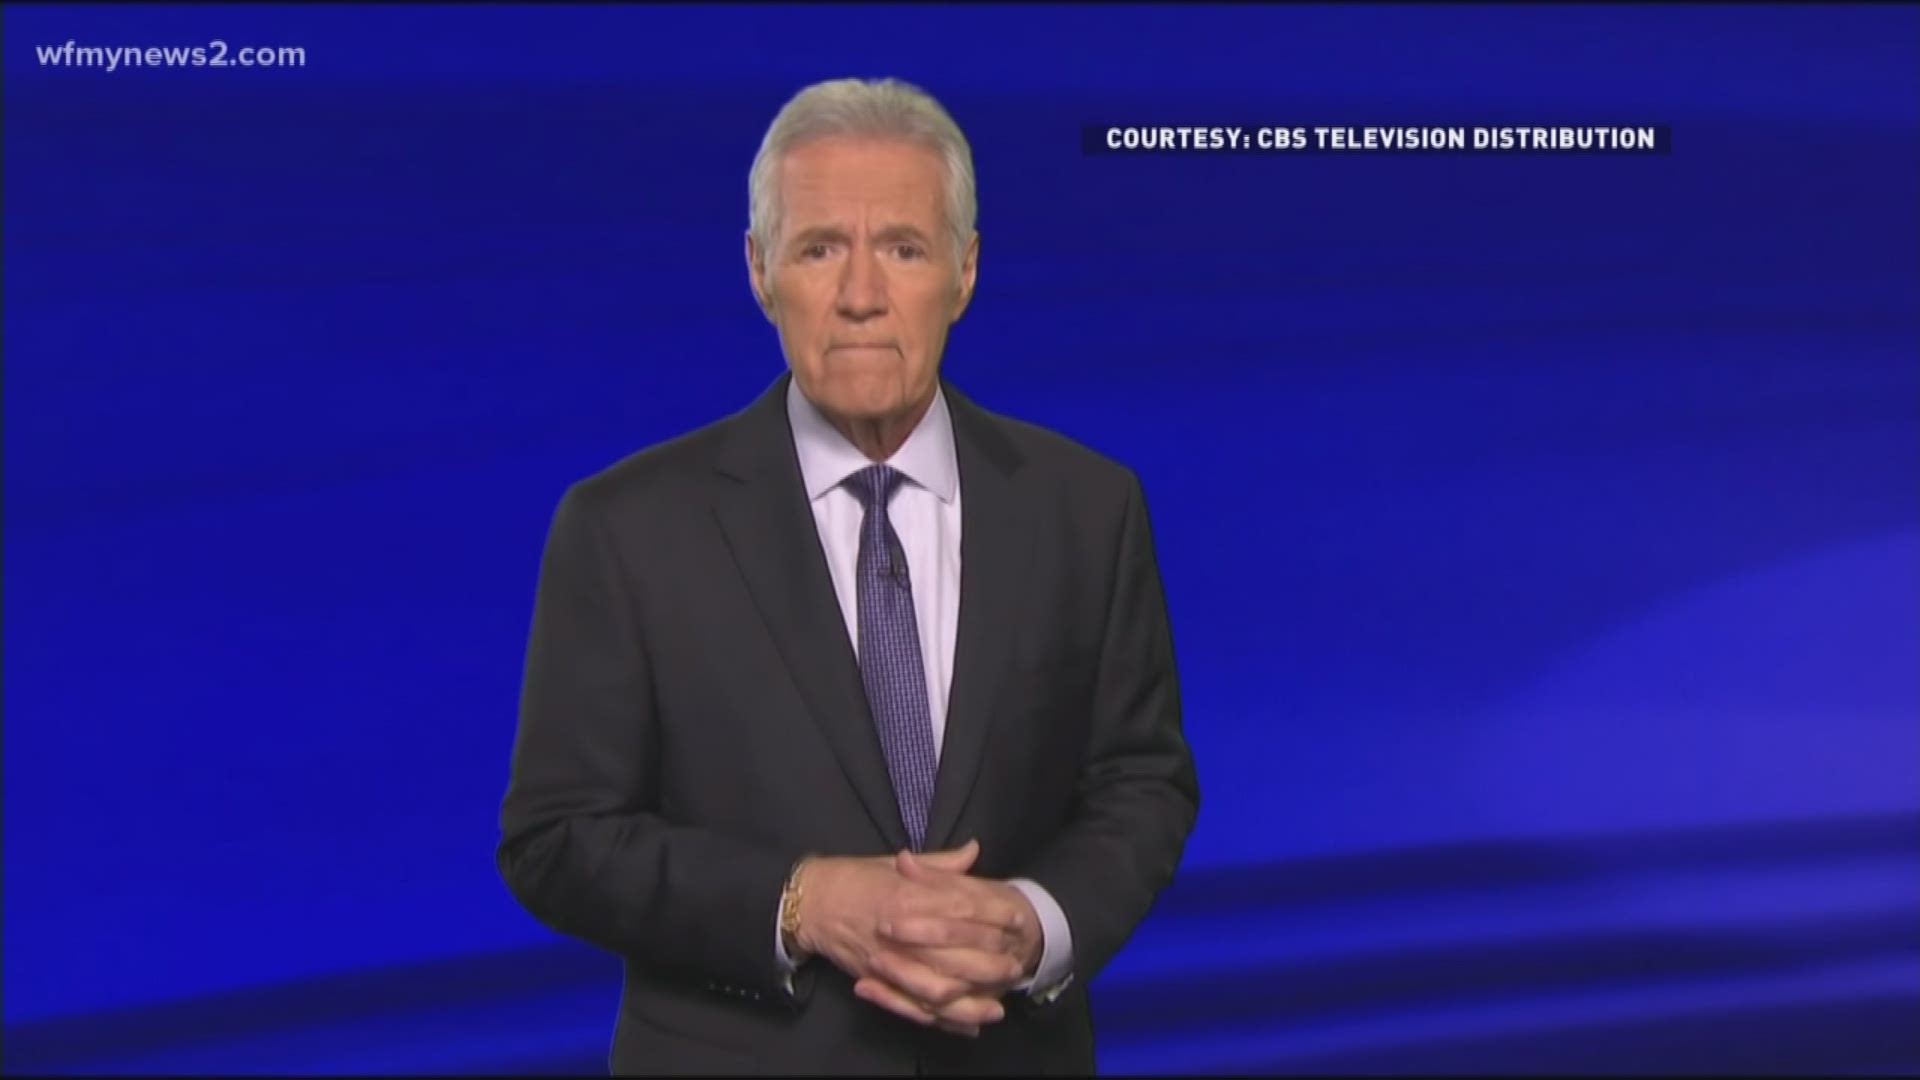 The Jeopardy host received an outpouring of support. Tonight he responded with gratitude.